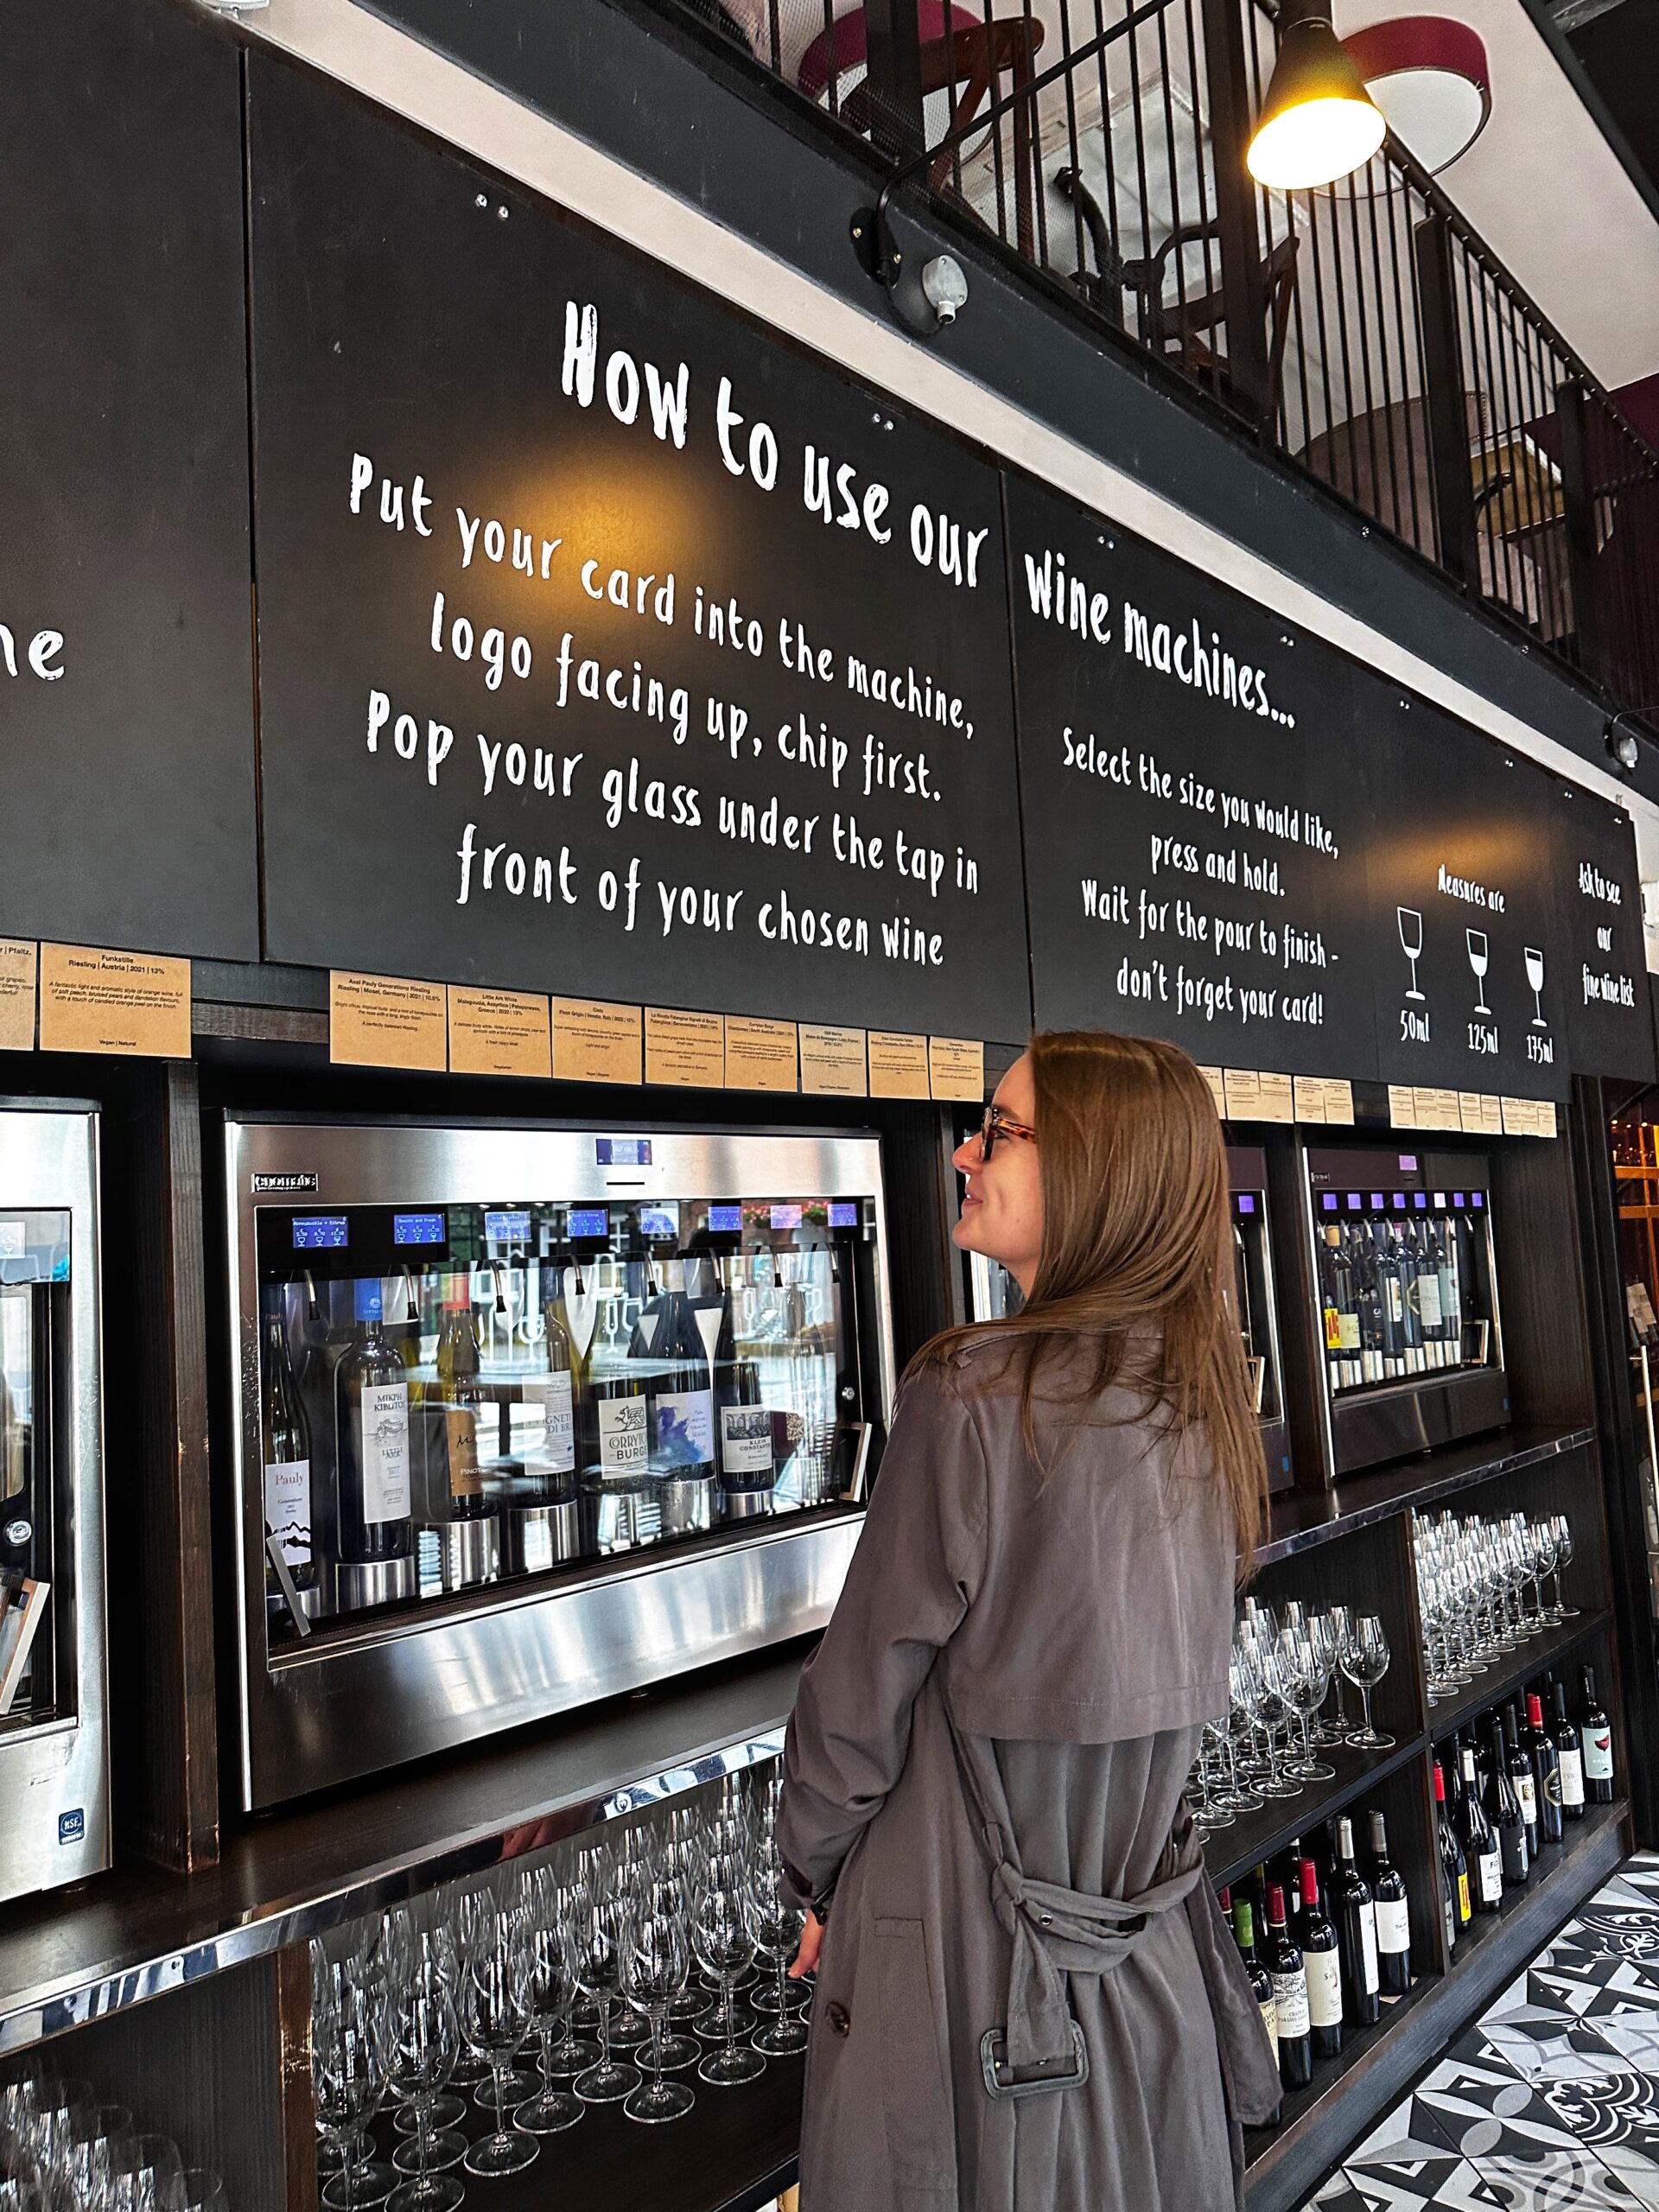 You can pour your own wine at the tasting machines